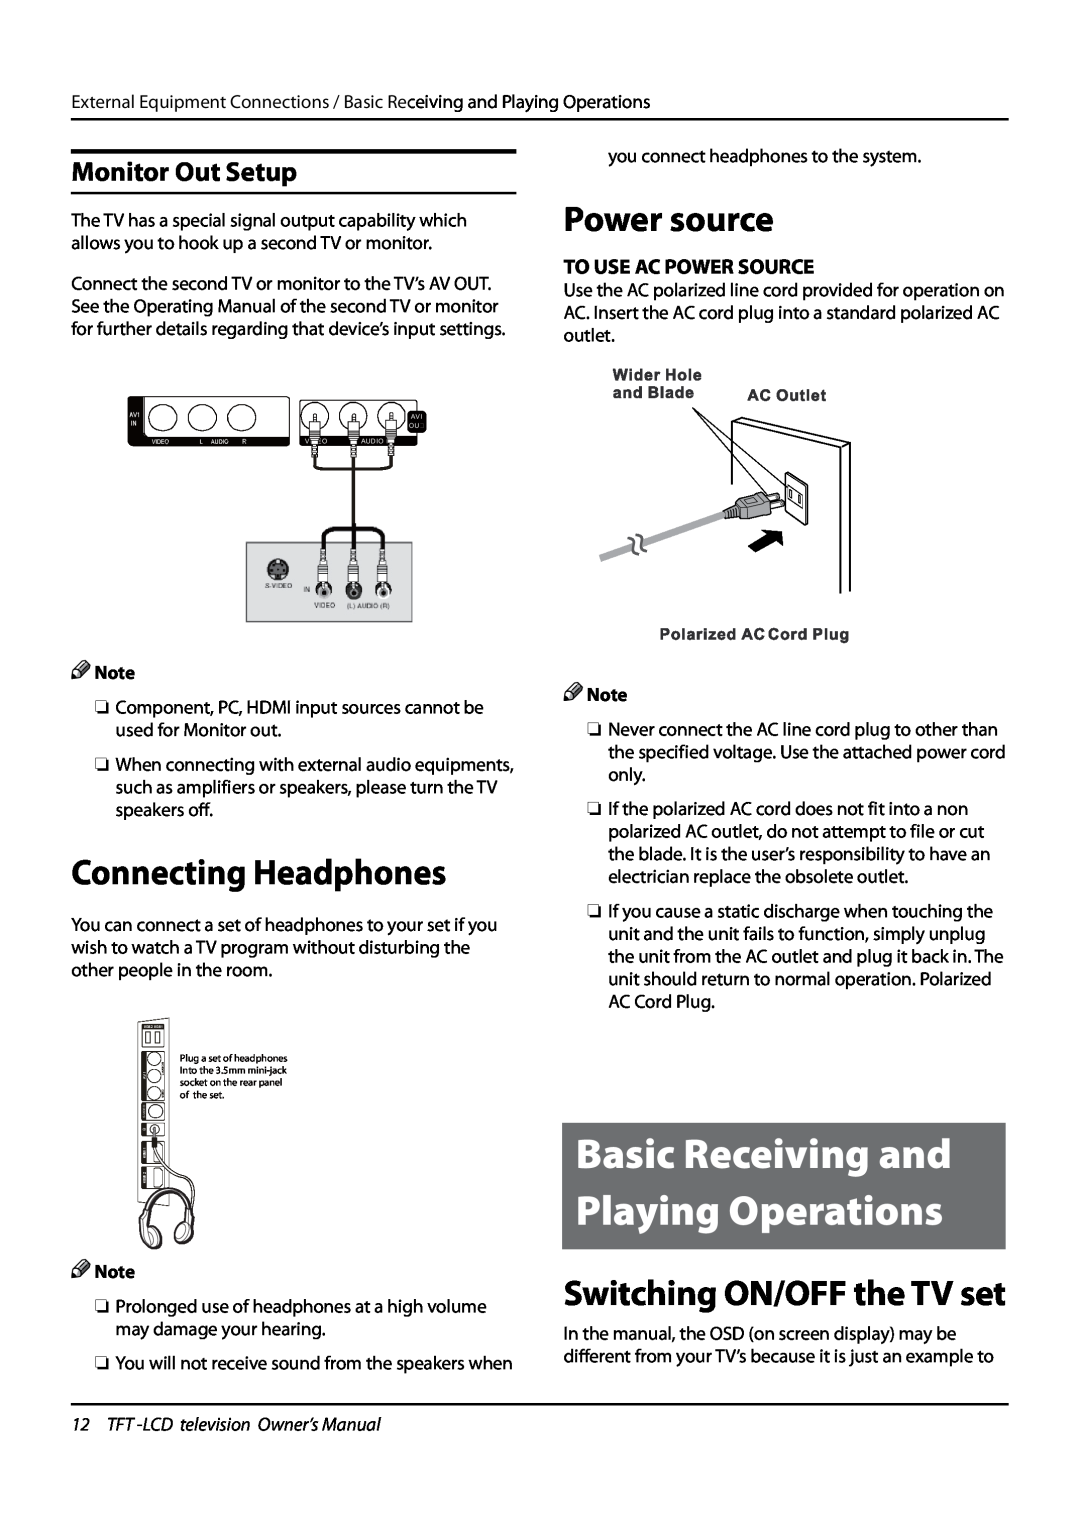 Haier L32K3 owner manual Connecting Headphones, Power source, Switching ON/OFF the TV set, Monitor Out Setup 